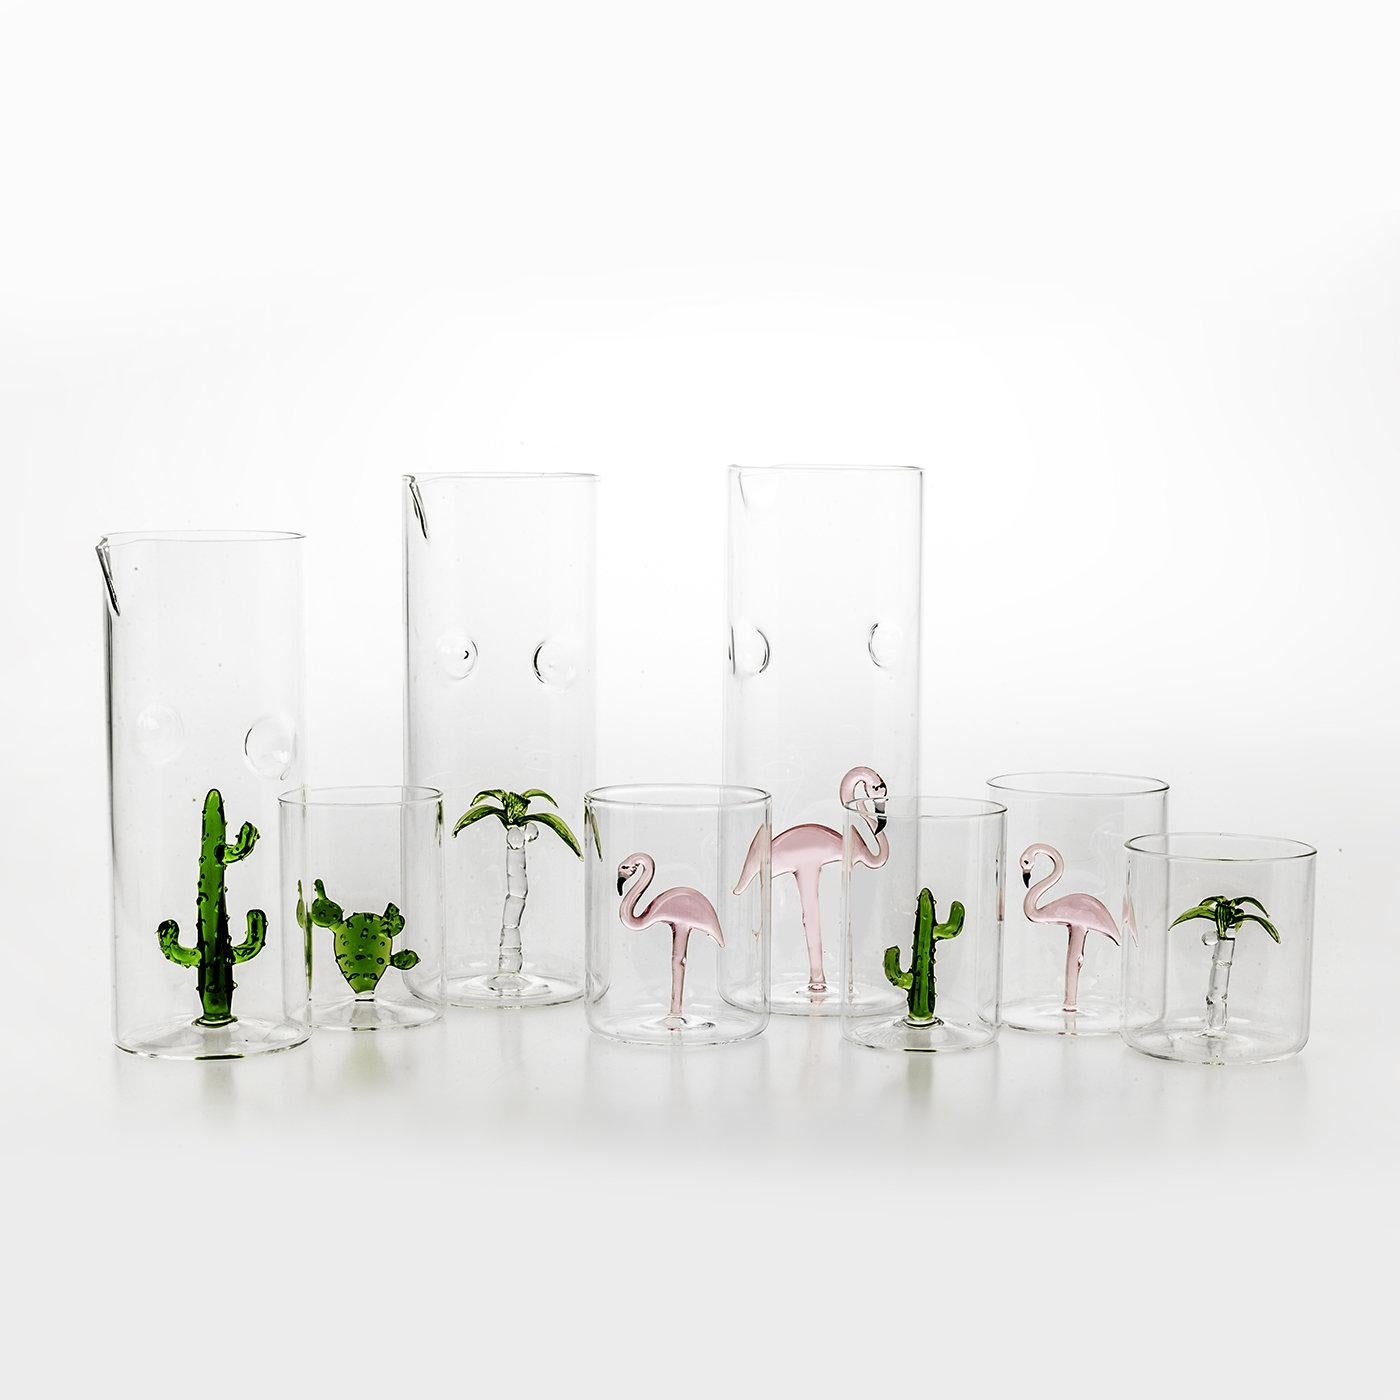 A stunning set that will add a special accent to any occasion, this set comprises one pitcher (8 x 22 cm) and four glasses (each 7 cm in diameter and 10 in height) that were handcrafted of clear glass, each adorned inside with a hand-painted, glass